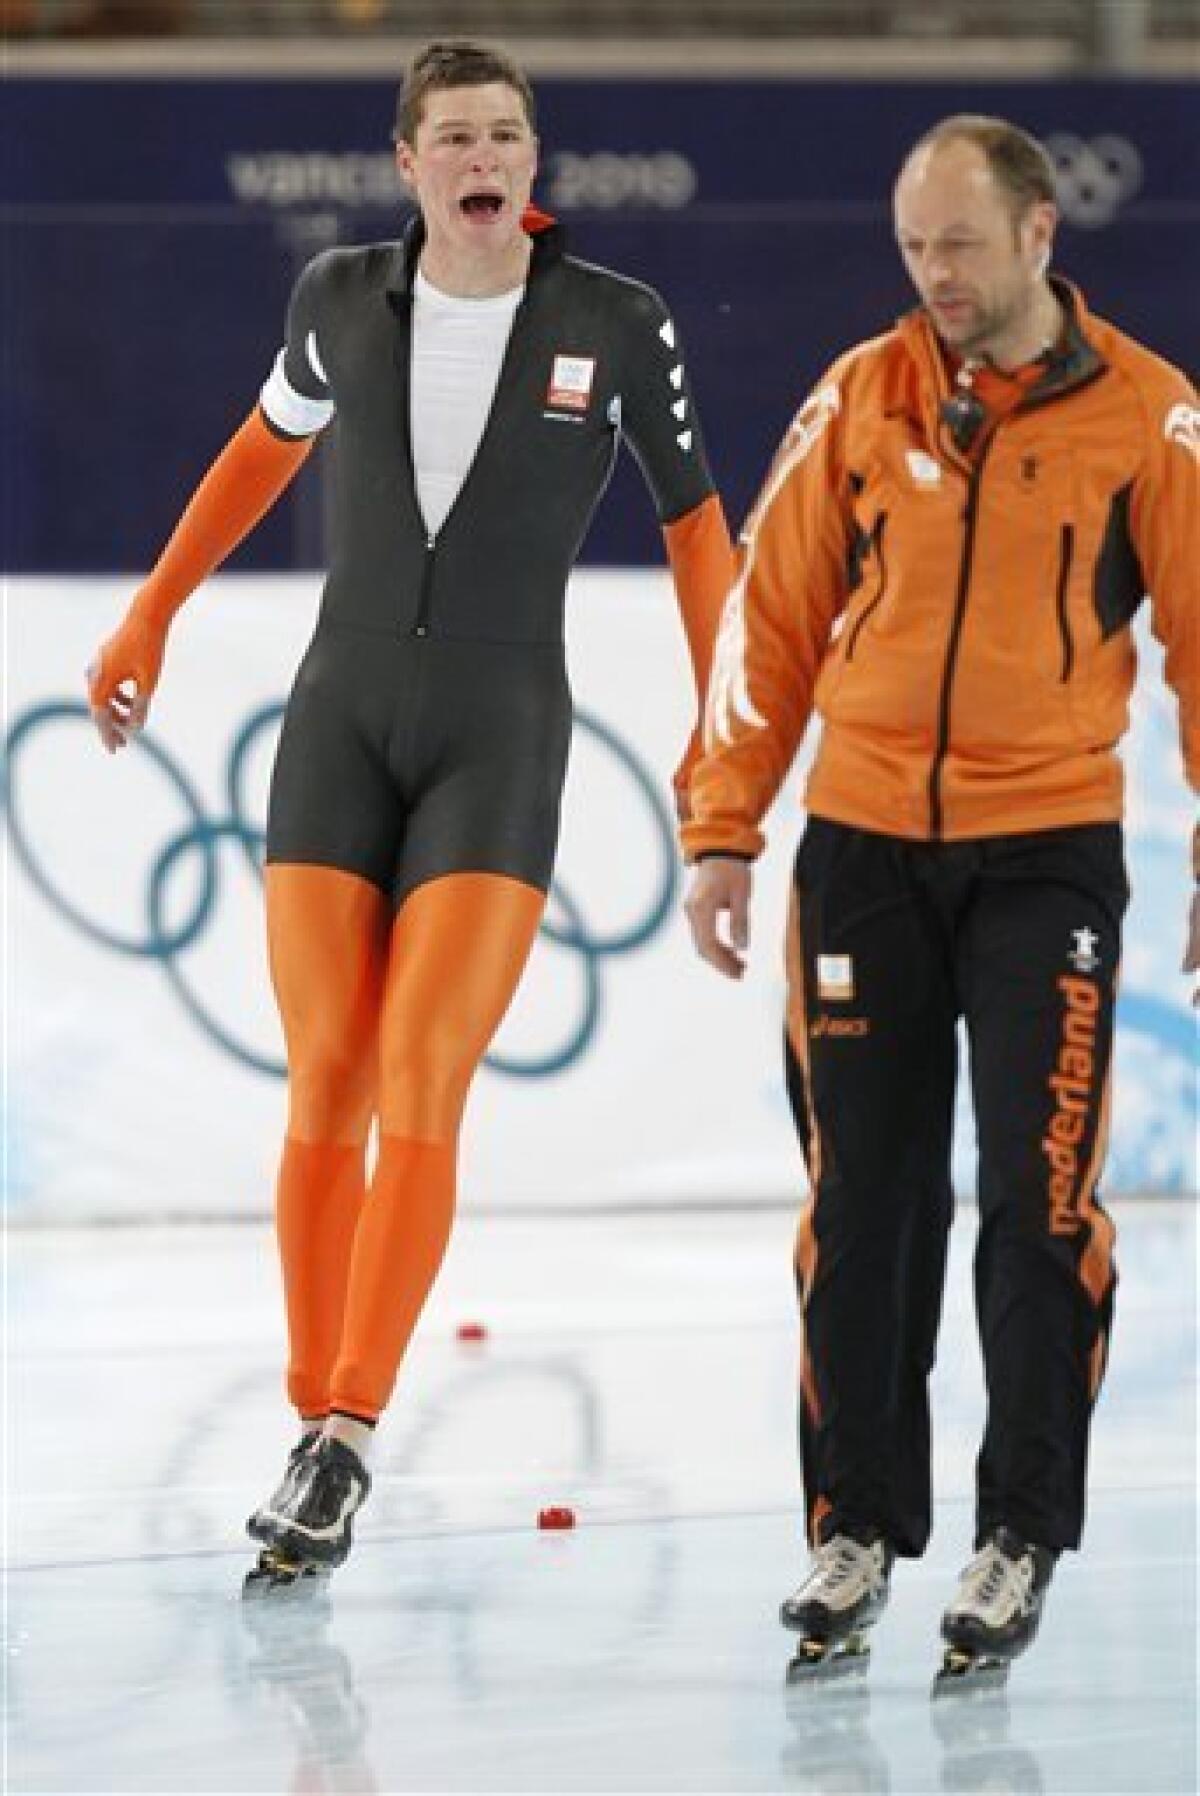 Netherlands's Sven Kramer, left, shouts at his coach Gerard Kemkers, right, after he was disqualified during the men's 10,000 meter speed skating race at the Richmond Olympic Oval at the Vancouver 2010 Olympics in Vancouver, British Columbia, Tuesday, Feb. 23, 2010. Lee Seung-hoon of South Korea won a stunning gold medal in men's 10,000-meter speedskating Tuesday when overwhelming favorite Sven Kramer made an amateurish mistake, failing to switch lanes just past the midway point of the race, and was disqualified. (AP Photo/Kevin Frayer)